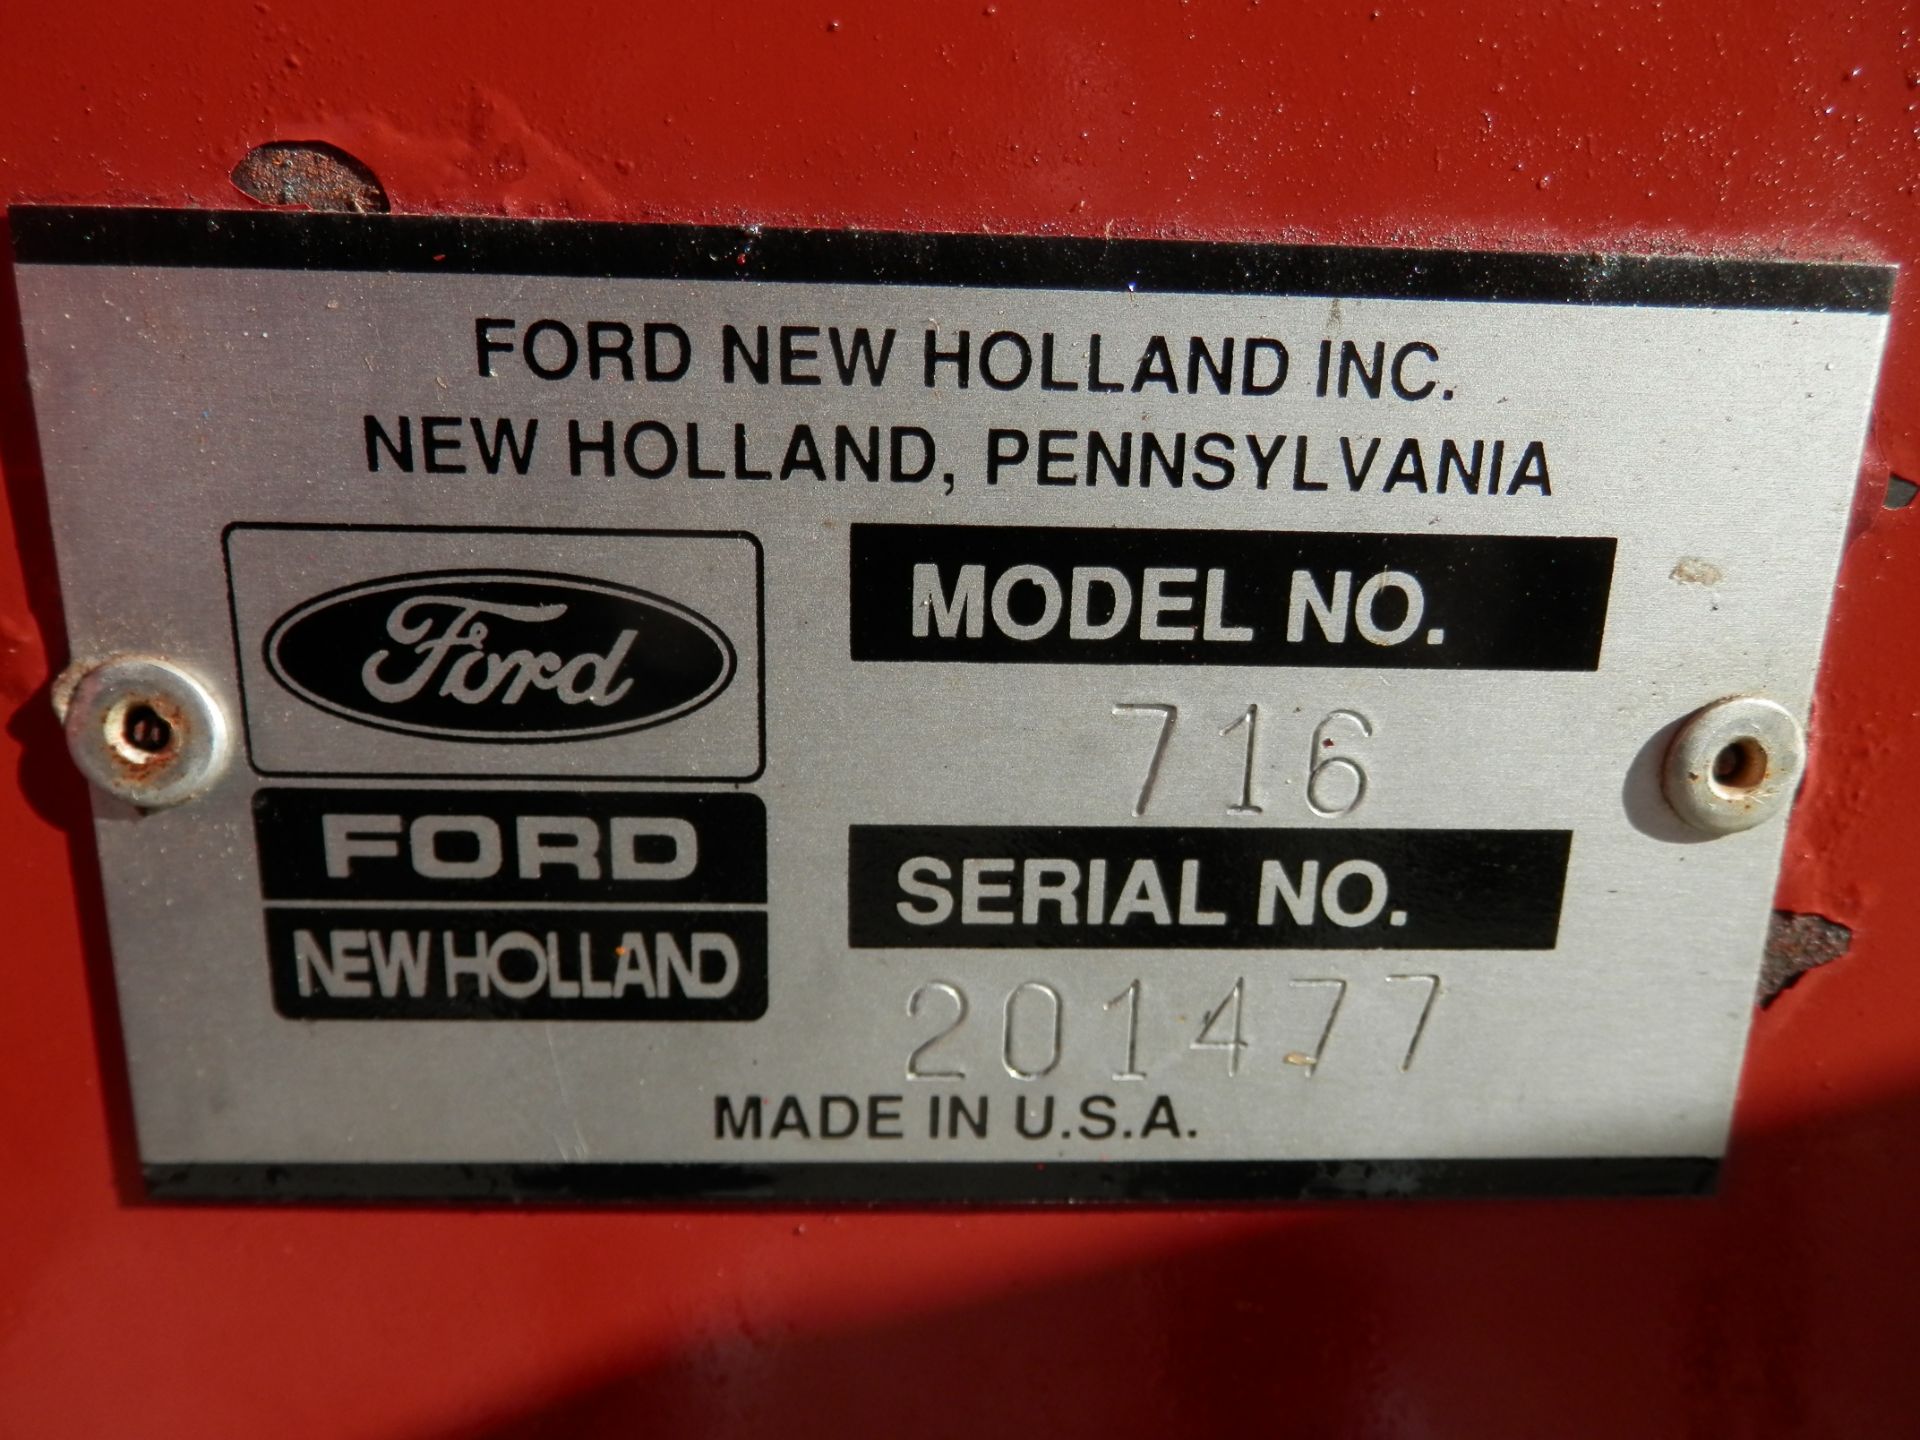 FORD NEW HOLLAND 716 16' CUT OFF FORAGE WAGON - Image 13 of 13